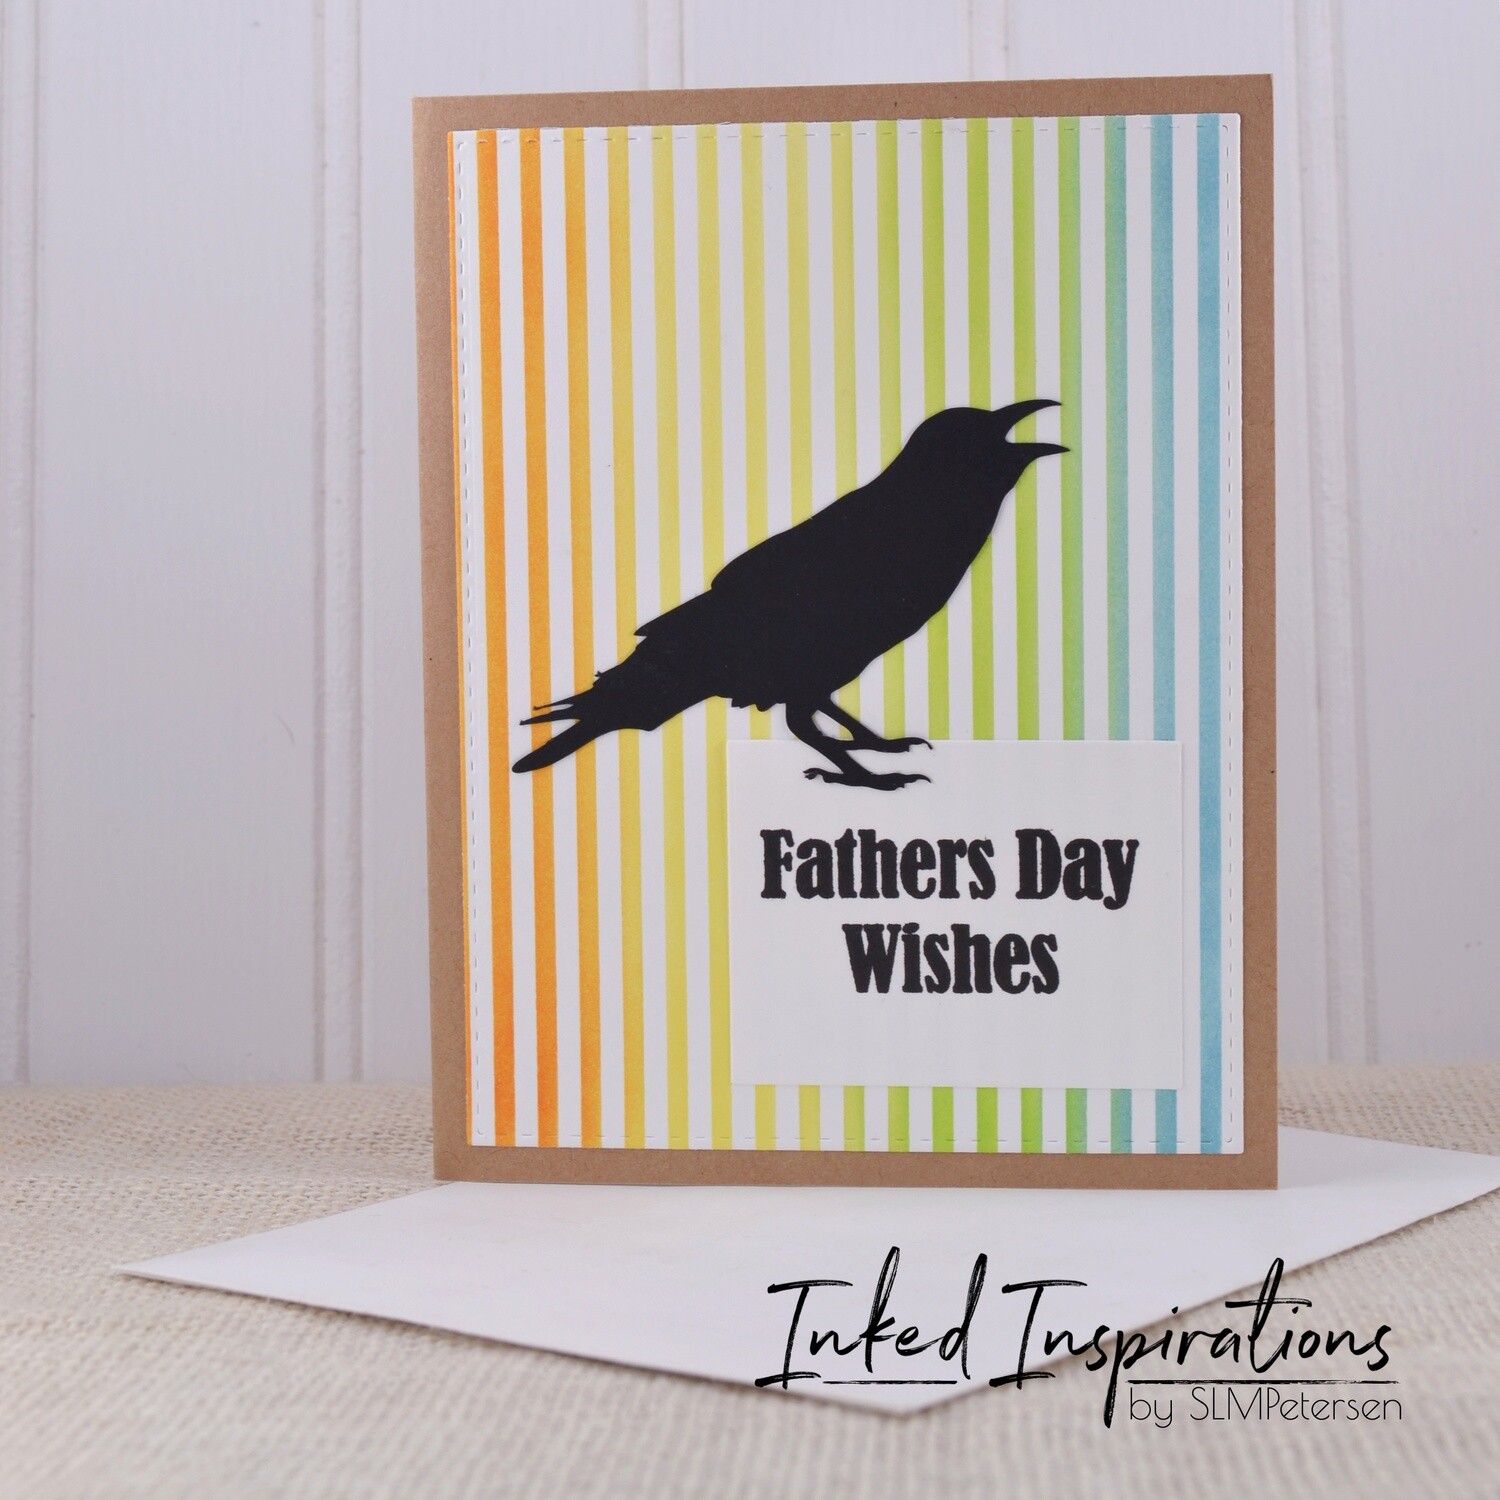 Father's Day Wishes - Raven & Stripes